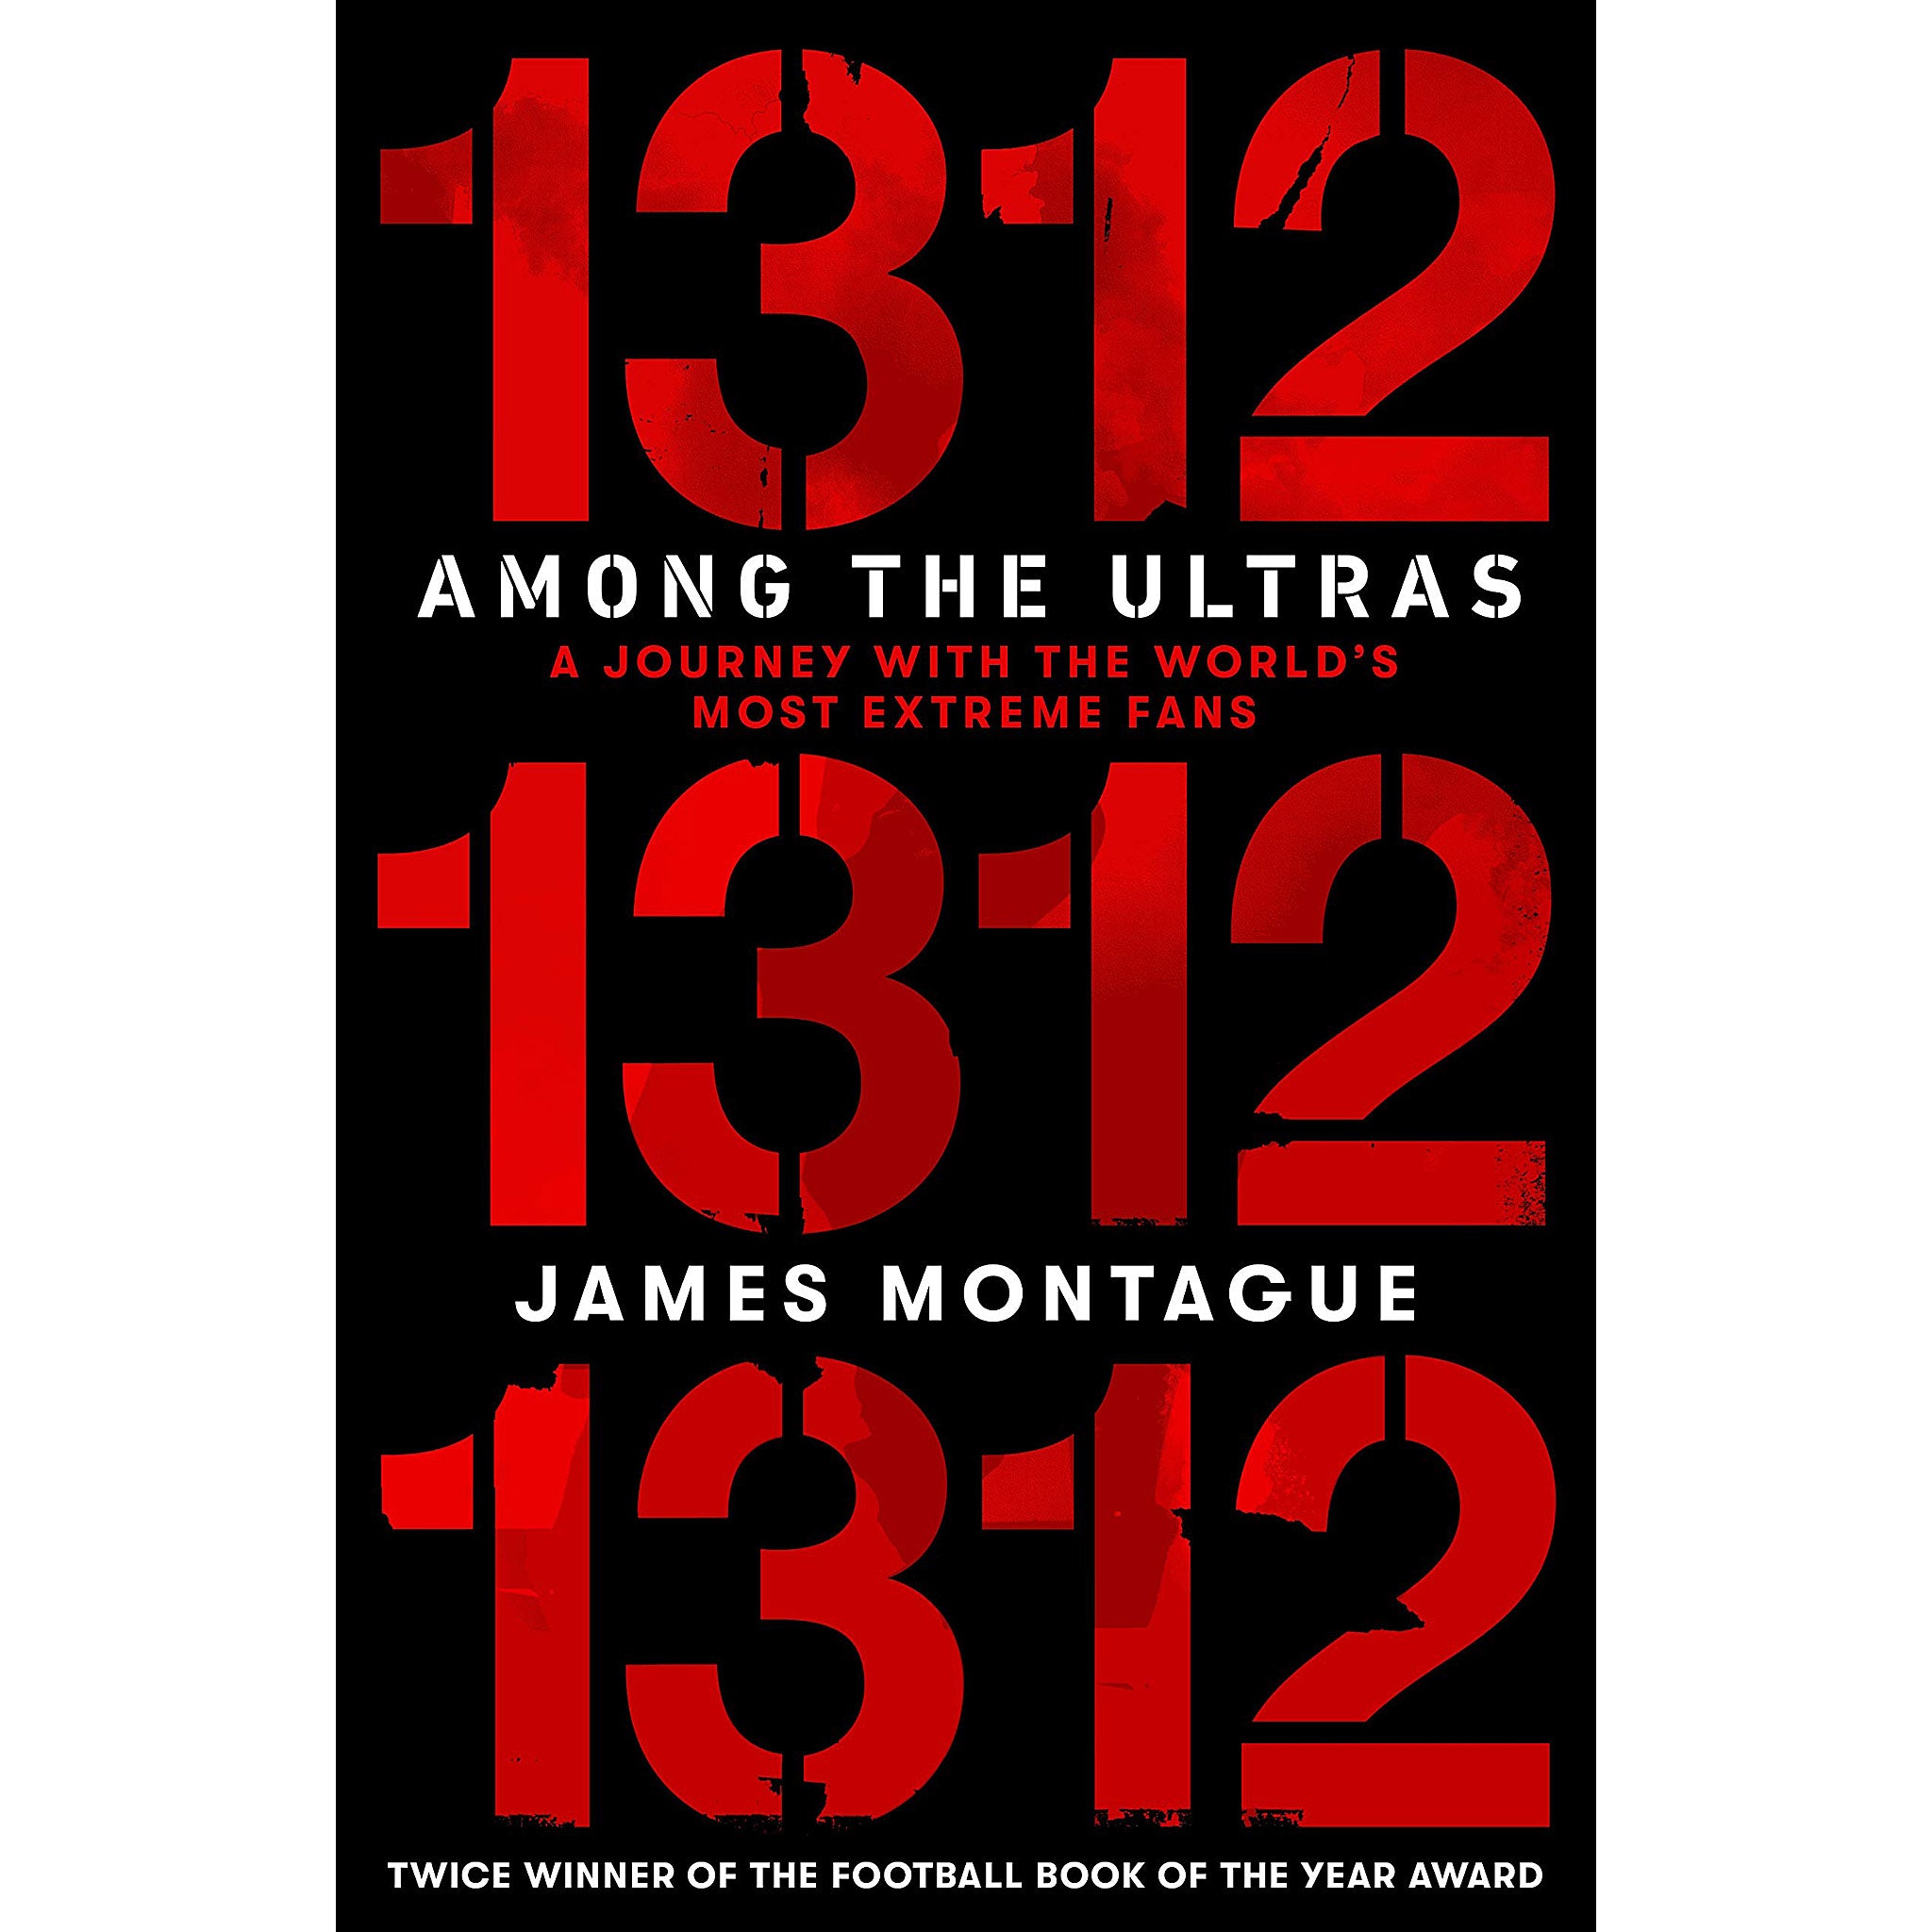 1312: Among the Ultras – A journey with the world's most extreme fans